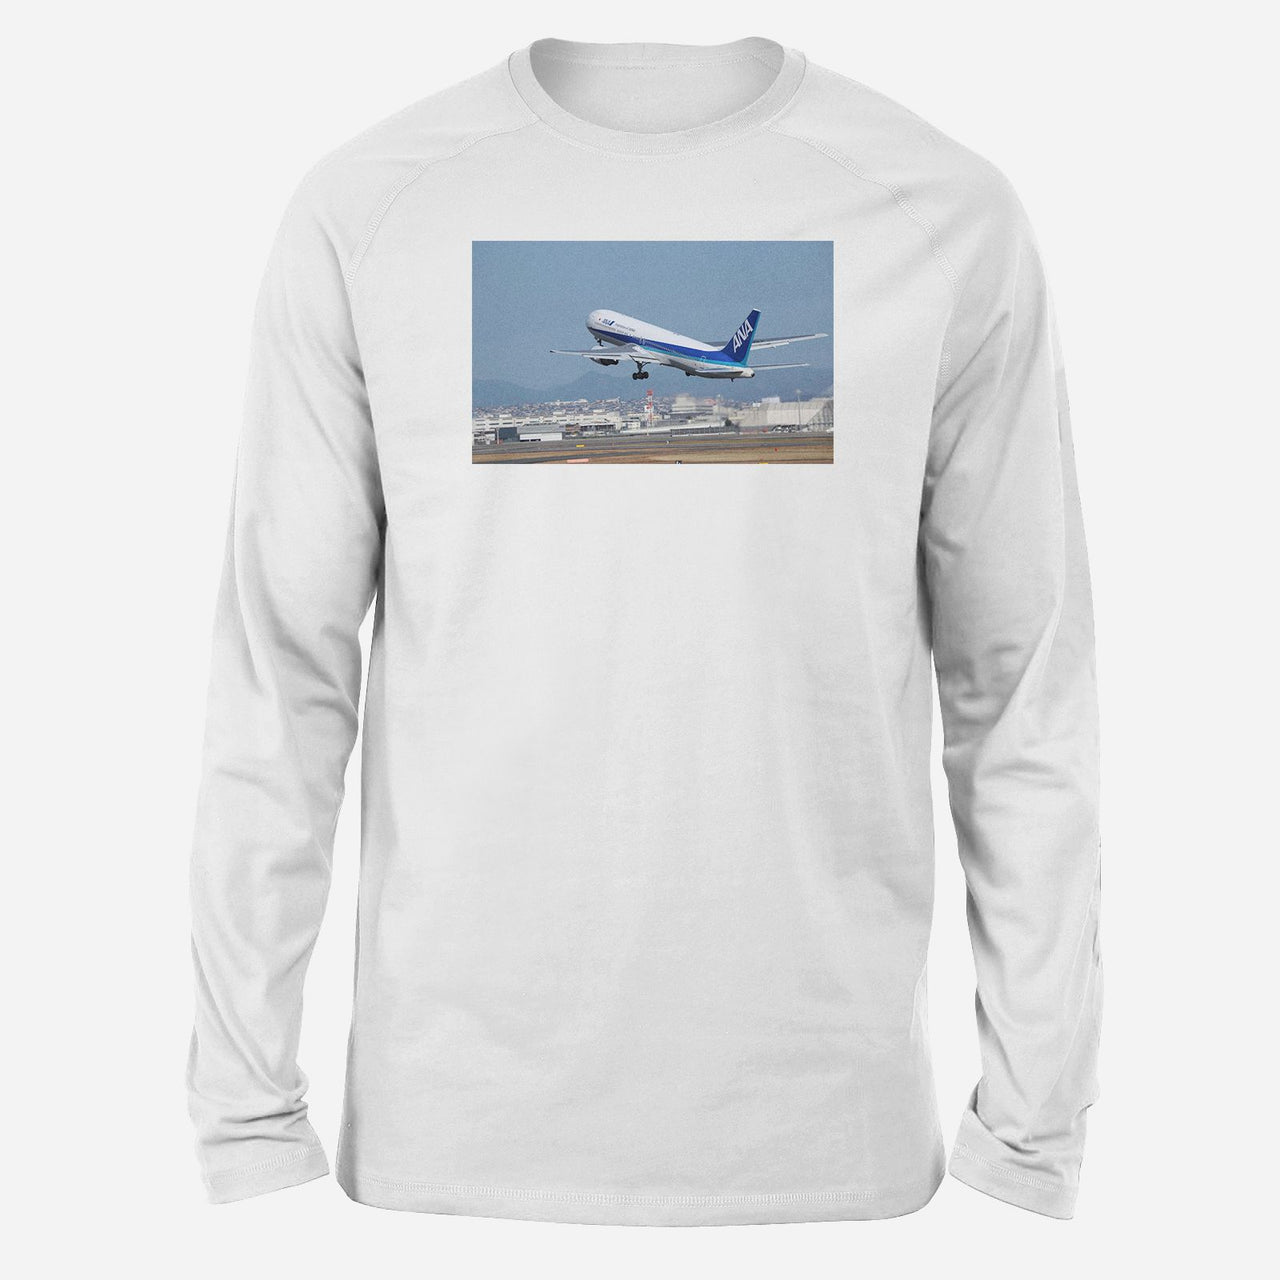 Departing ANA's Boeing 767 Designed Long-Sleeve T-Shirts